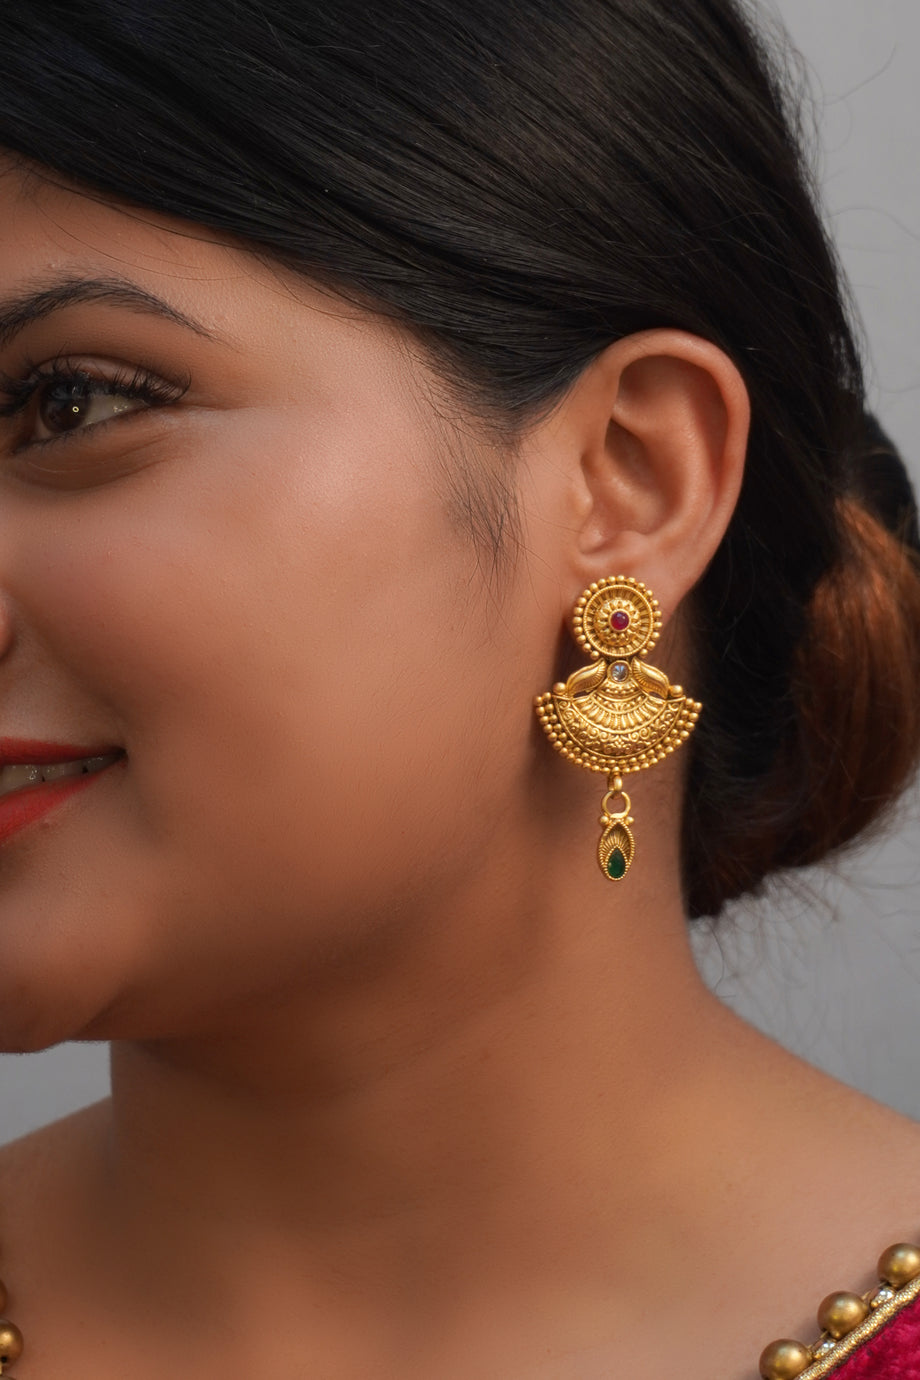 indian gold earrings - Google Search | Gold hoop earrings style, Gold  earrings designs, Gold rings fashion